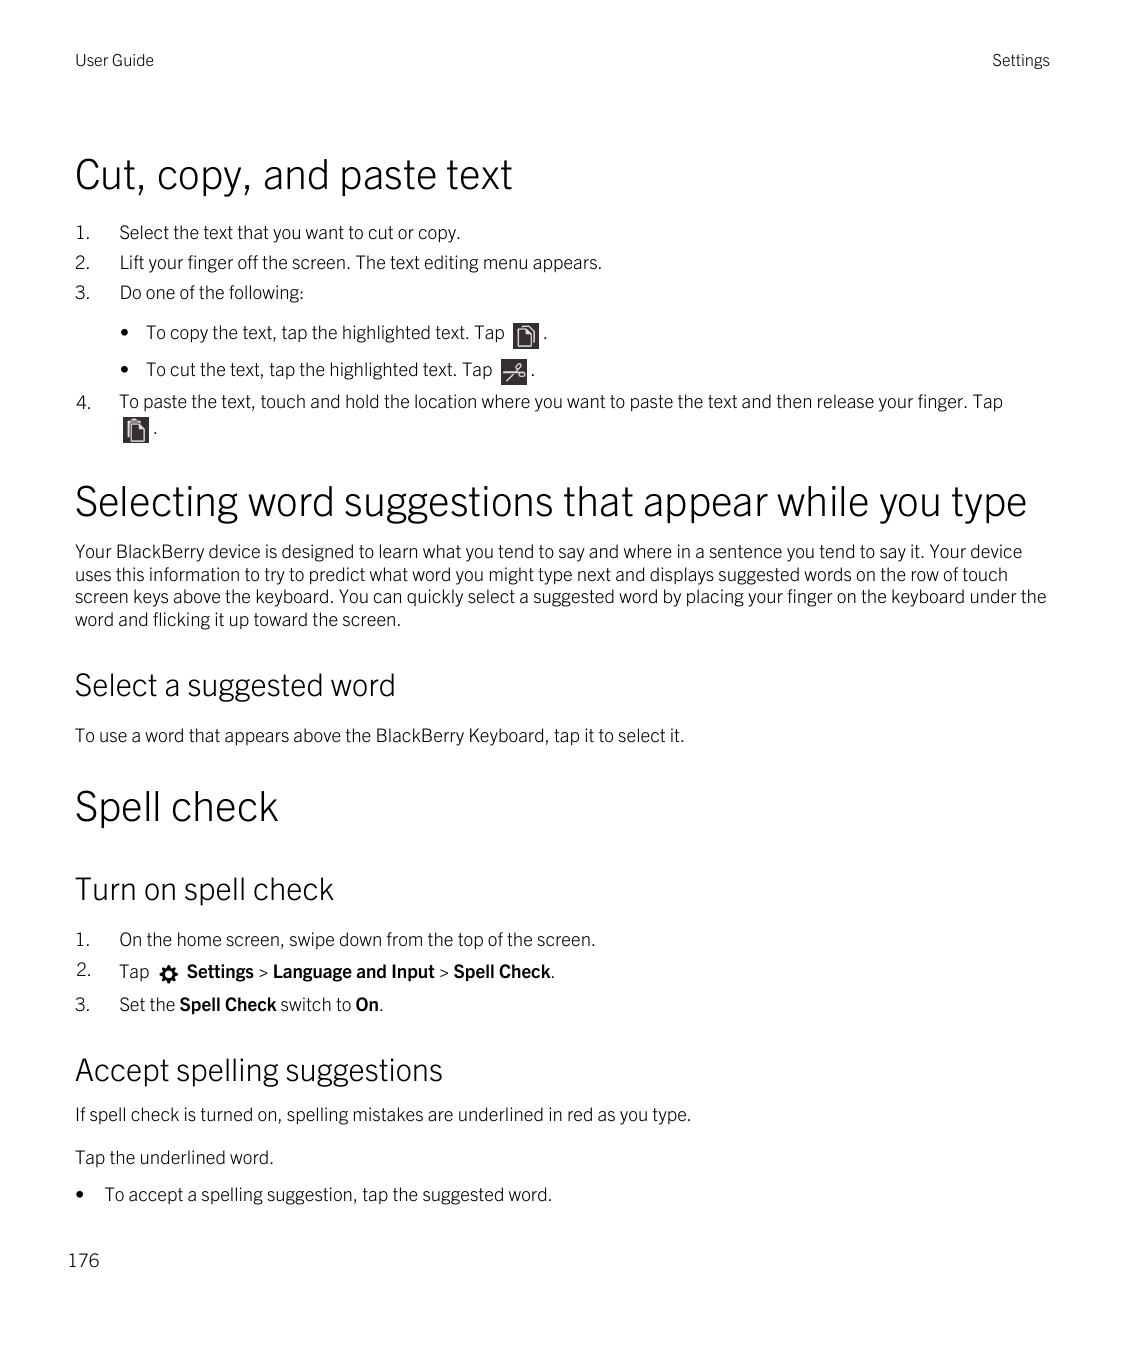 User GuideSettingsCut, copy, and paste text1.Select the text that you want to cut or copy.2.Lift your finger off the screen. The